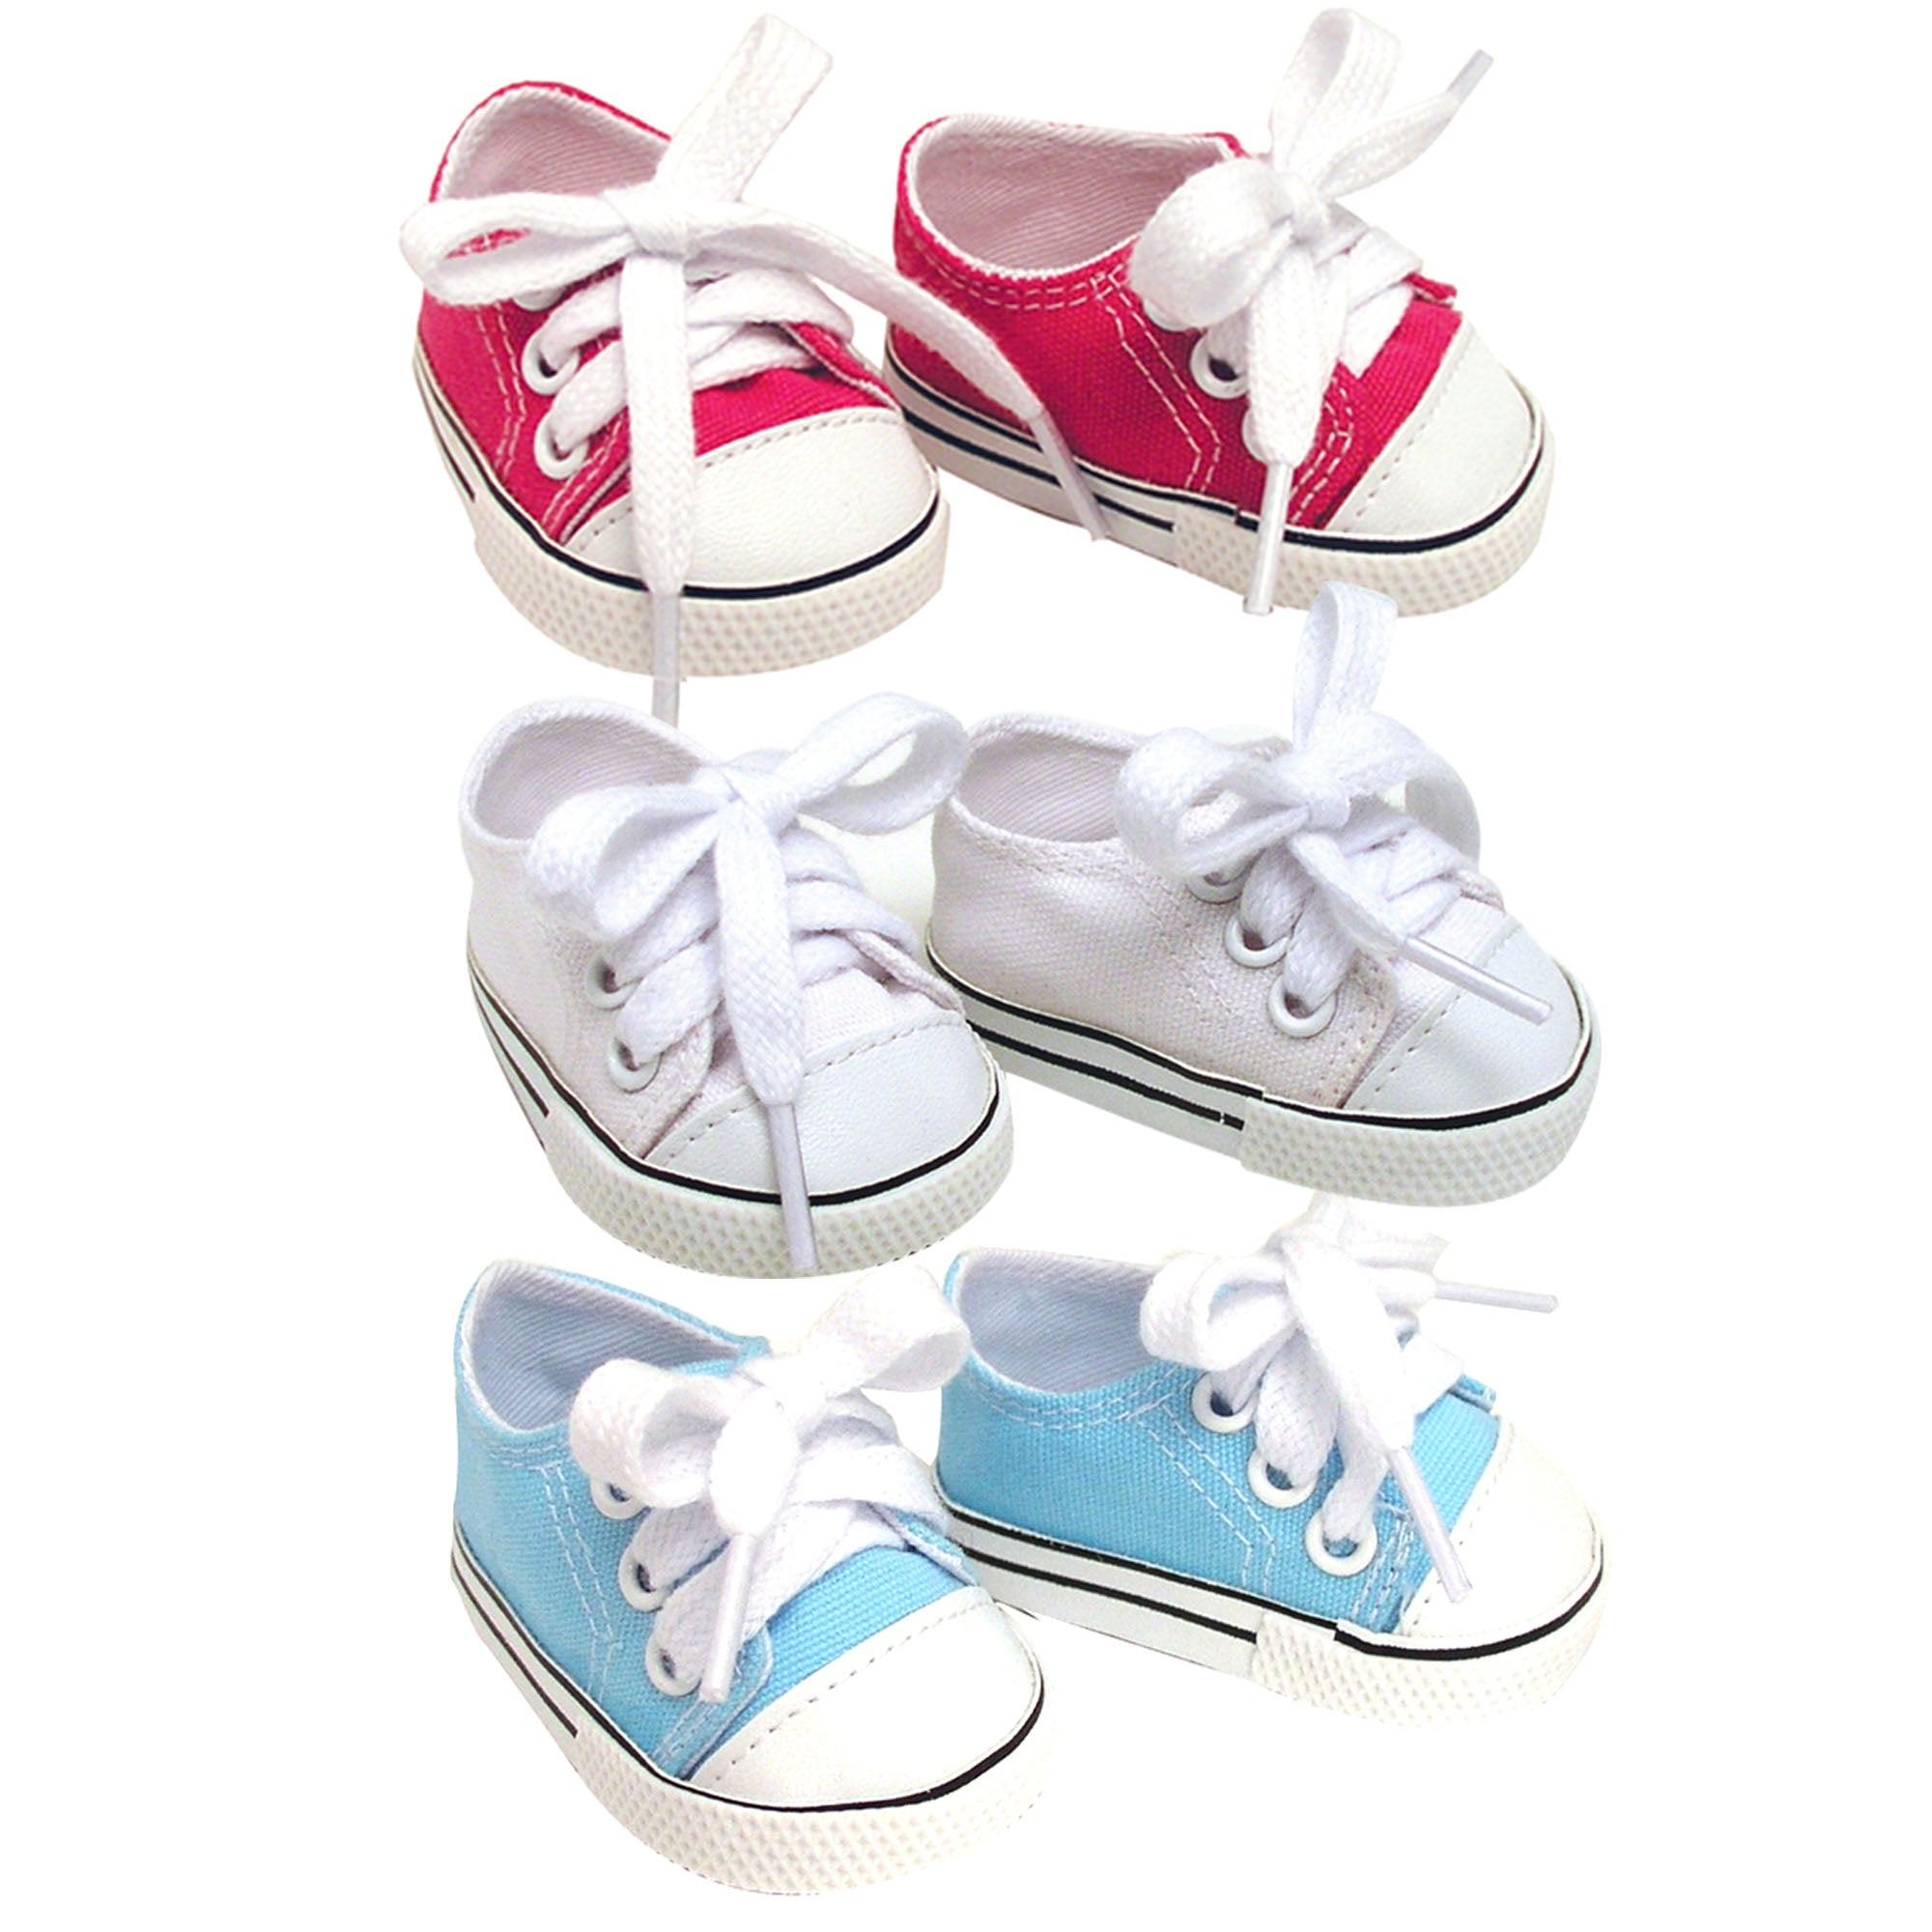 Sophia's Set of 3 Canvas Tennis Shoes for 18" Dolls, Pink, White, and Blue